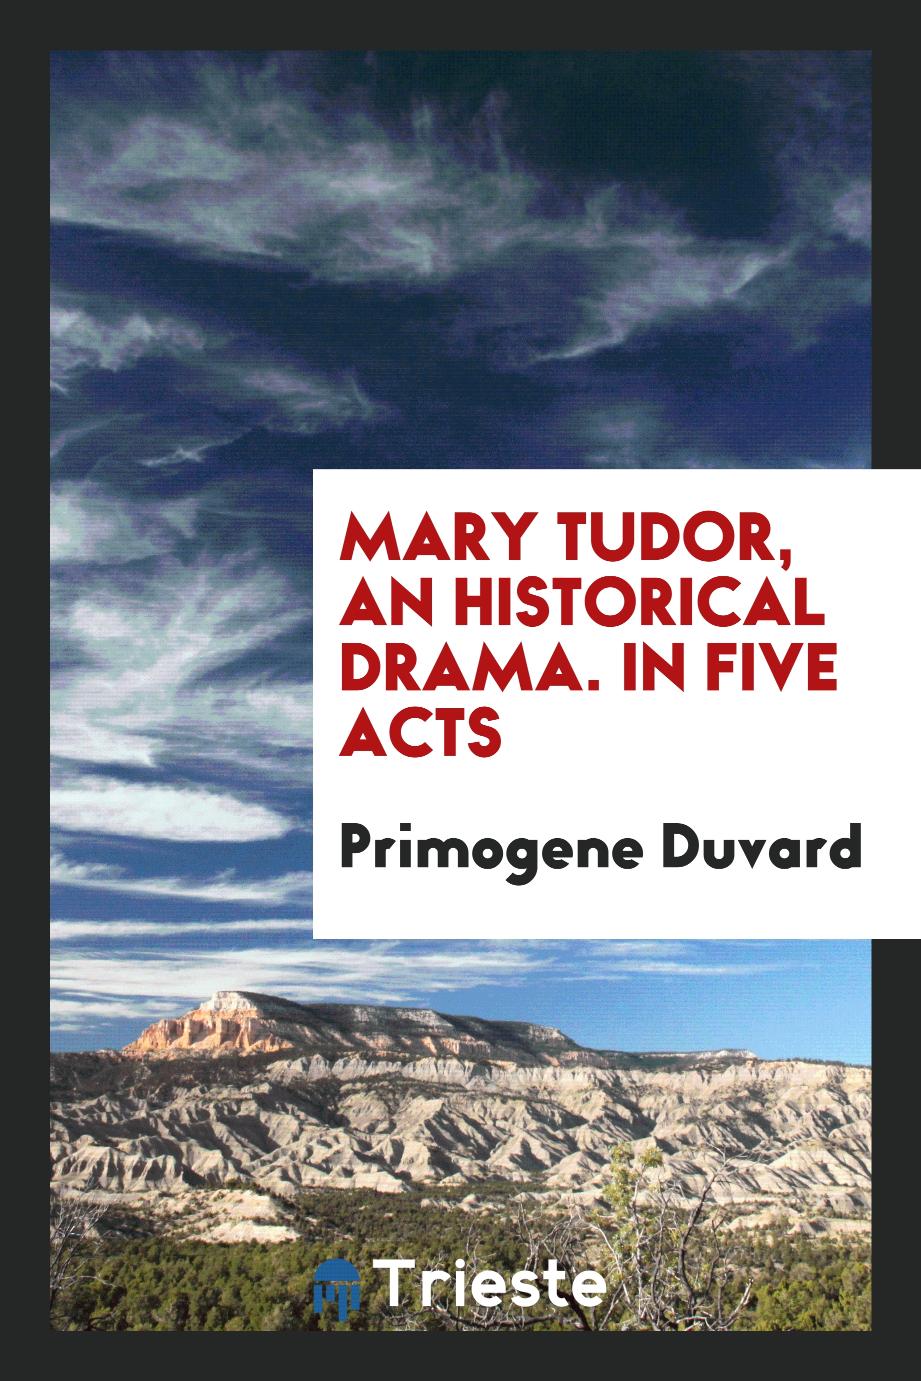 Mary Tudor, an Historical Drama. In five acts